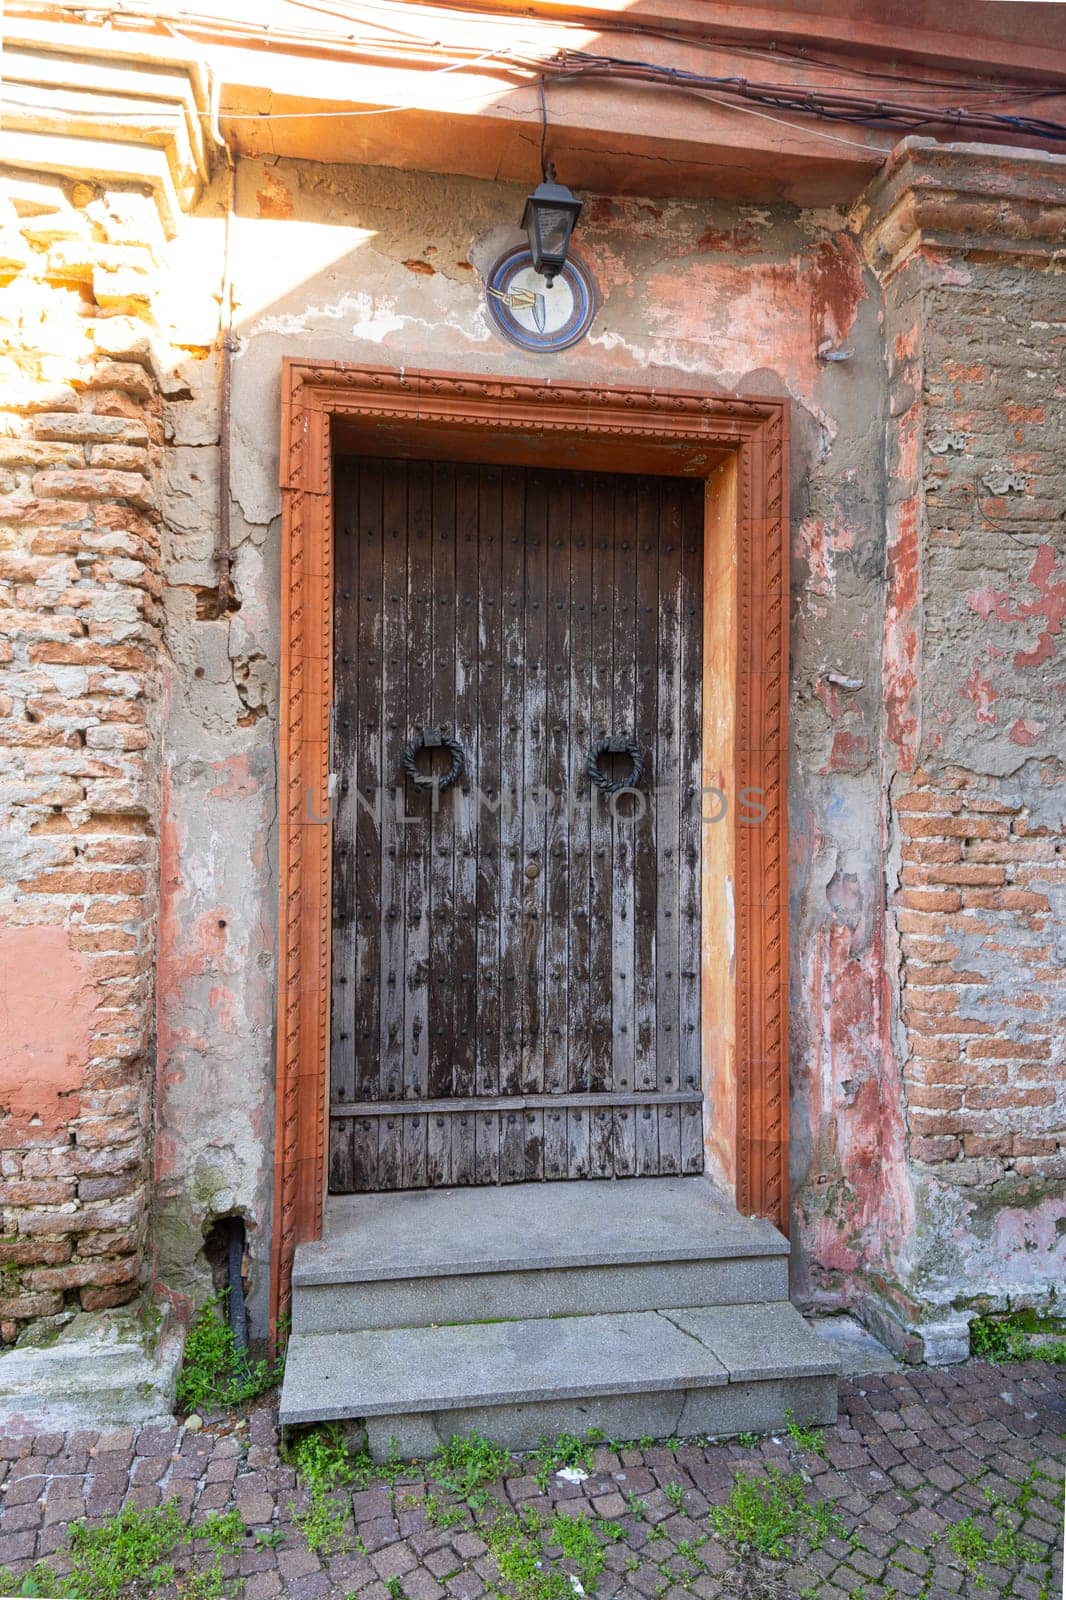 the wooden entrance doors of old rural houses in the Italian countryside